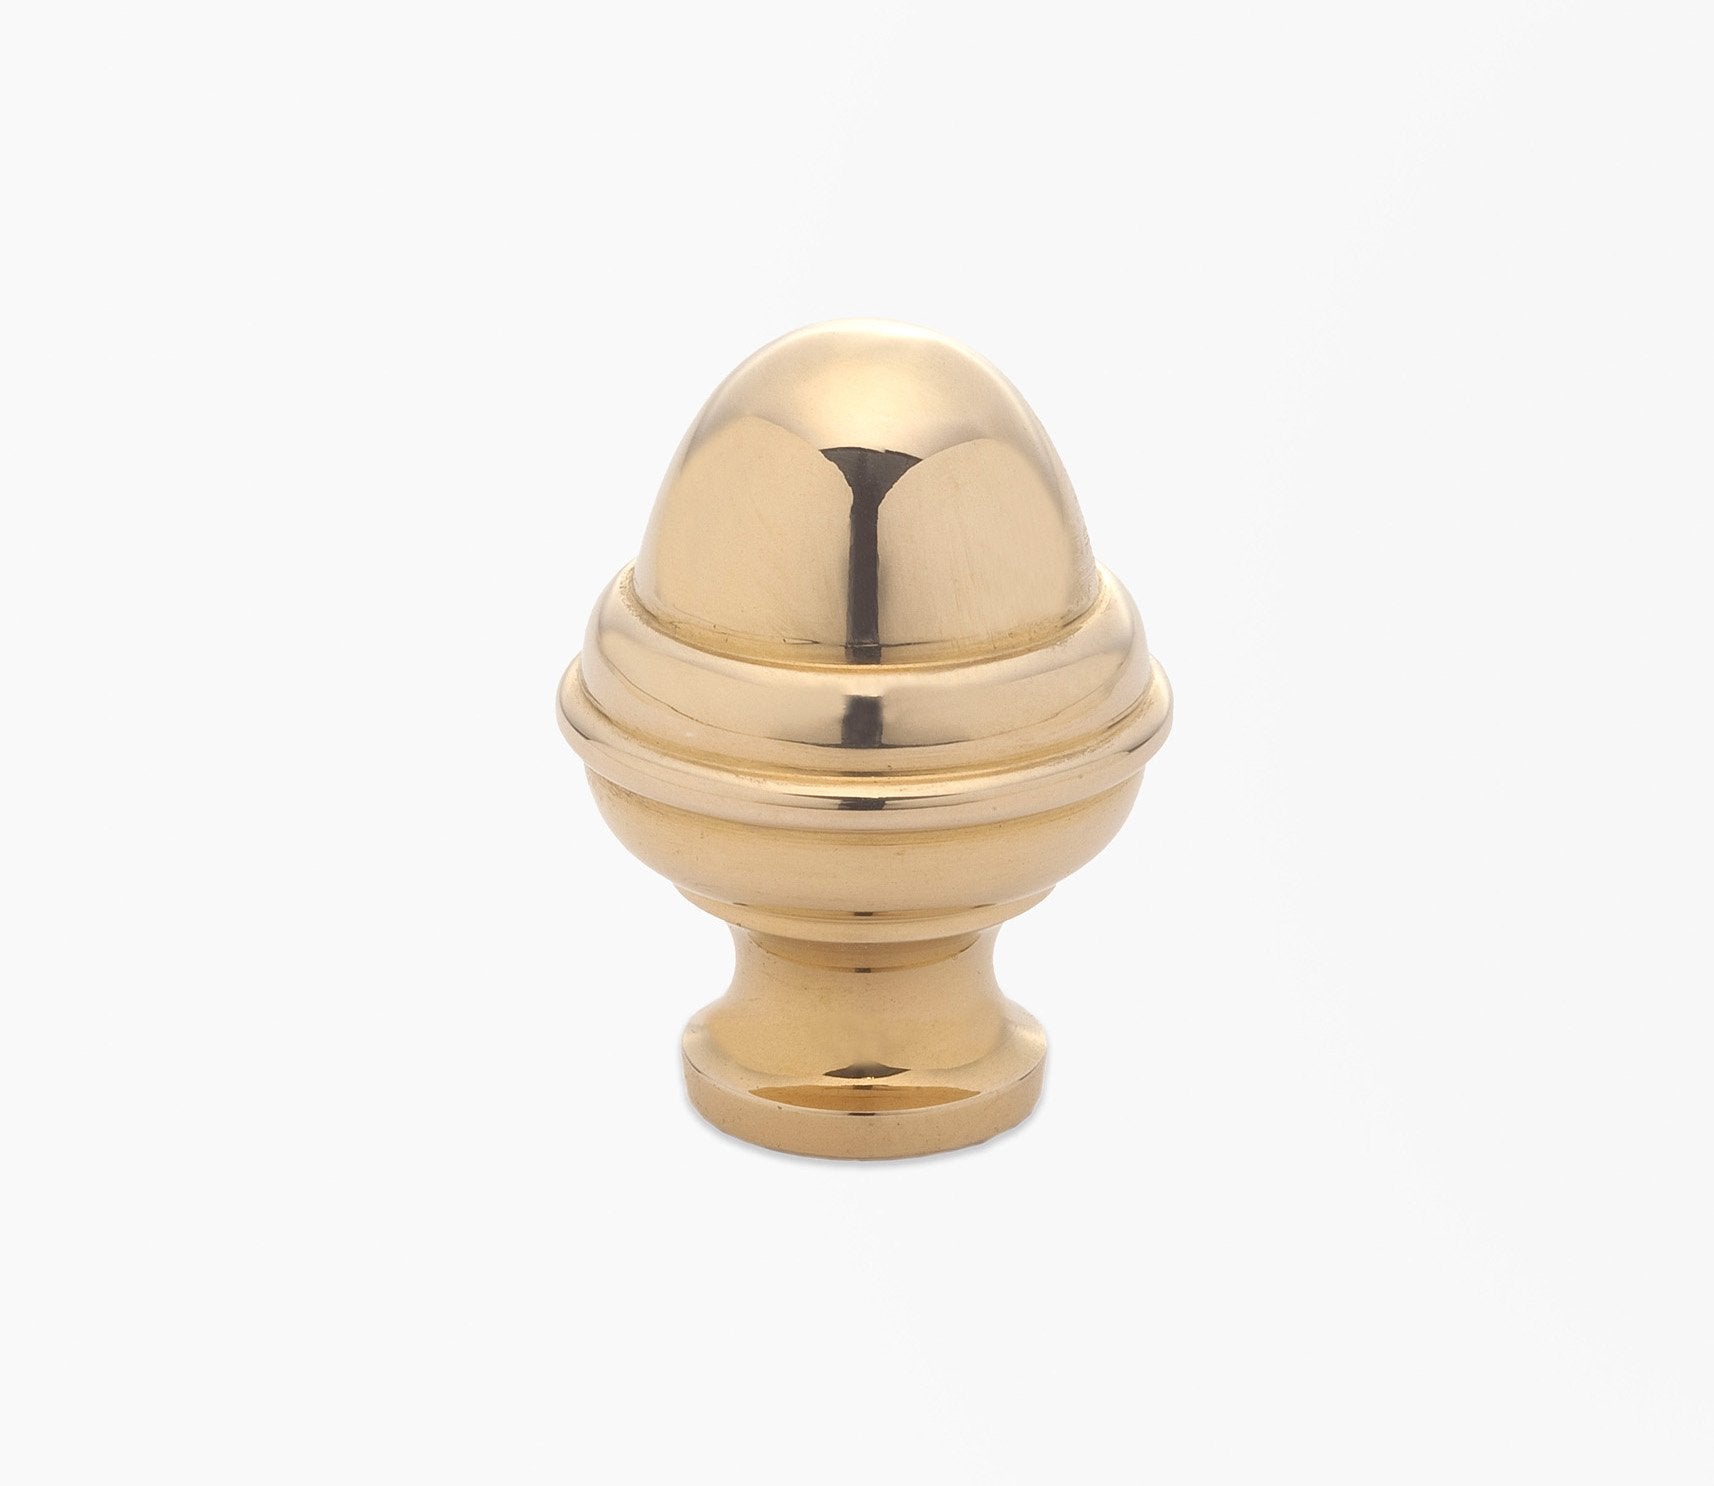 Finial 201 Product Image 1